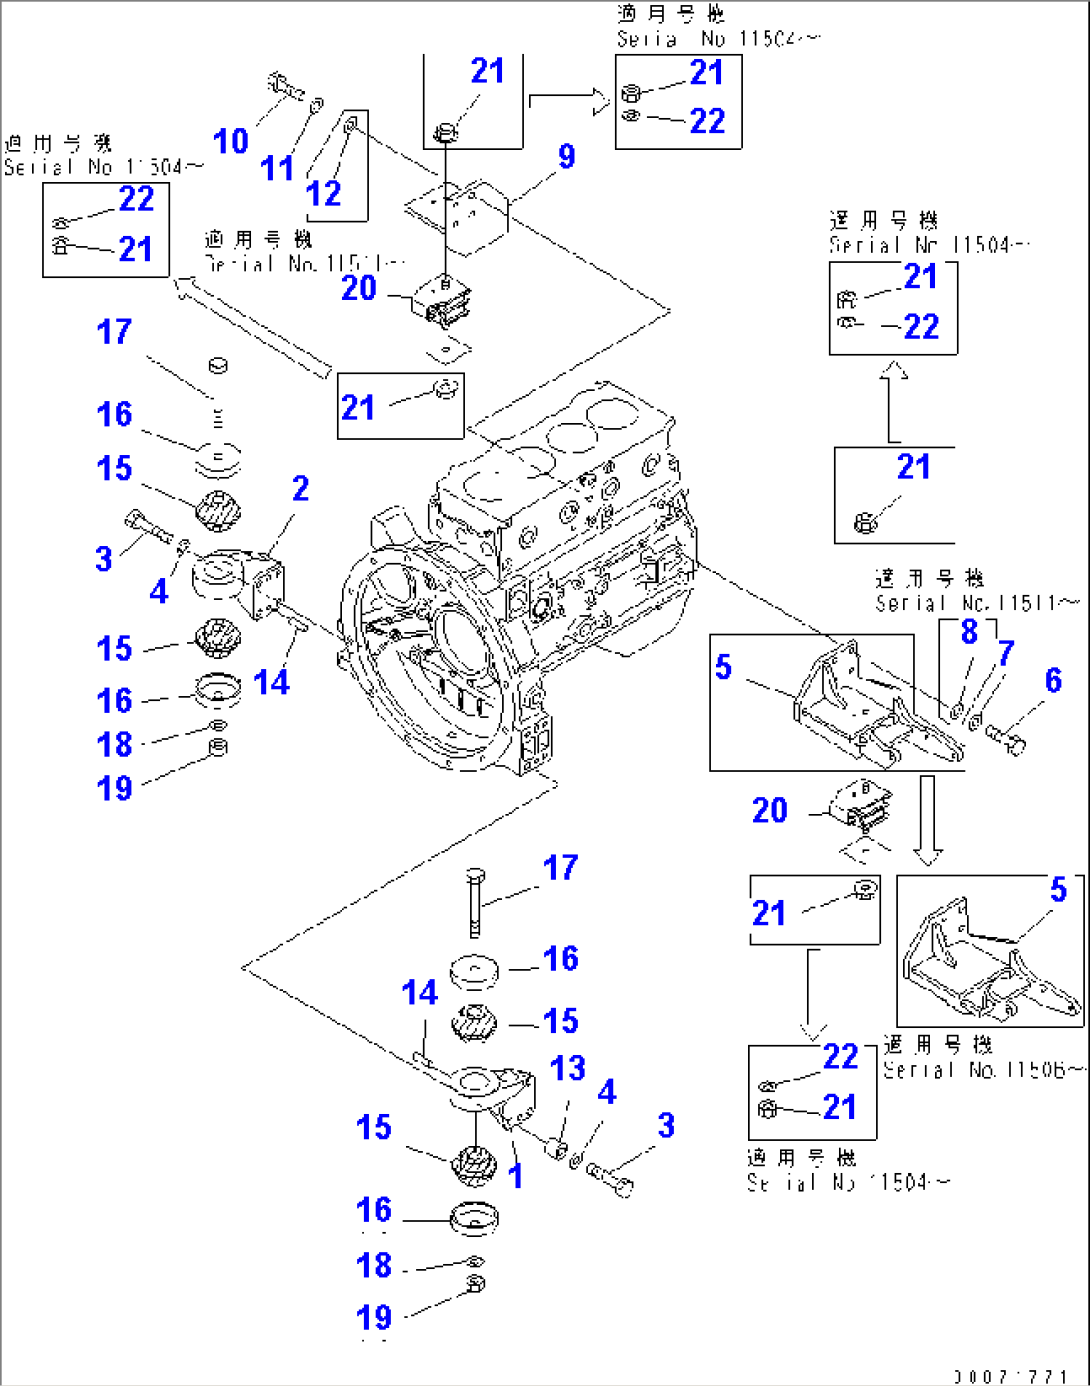 ENGINE MOUNTING PARTS (WITH AIR CONDITIONER)(#11501-)